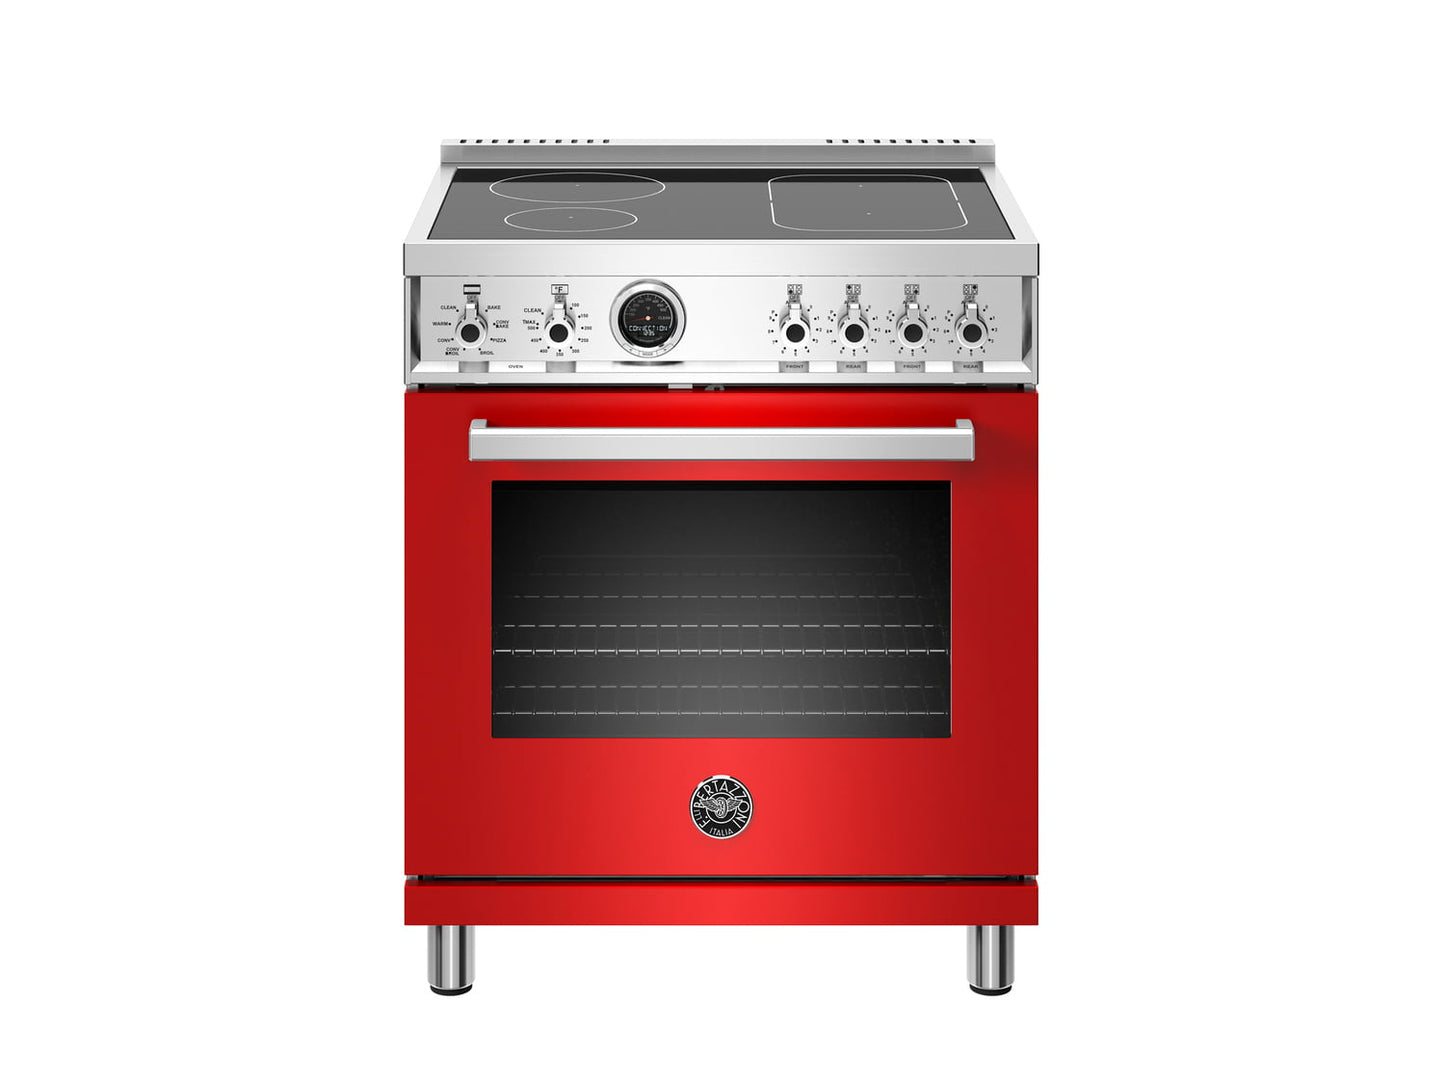 Bertazzoni PROF304INSROT 30 Inch Induction Range, 4 Heating Zones, Electric Self-Clean Oven Rosso